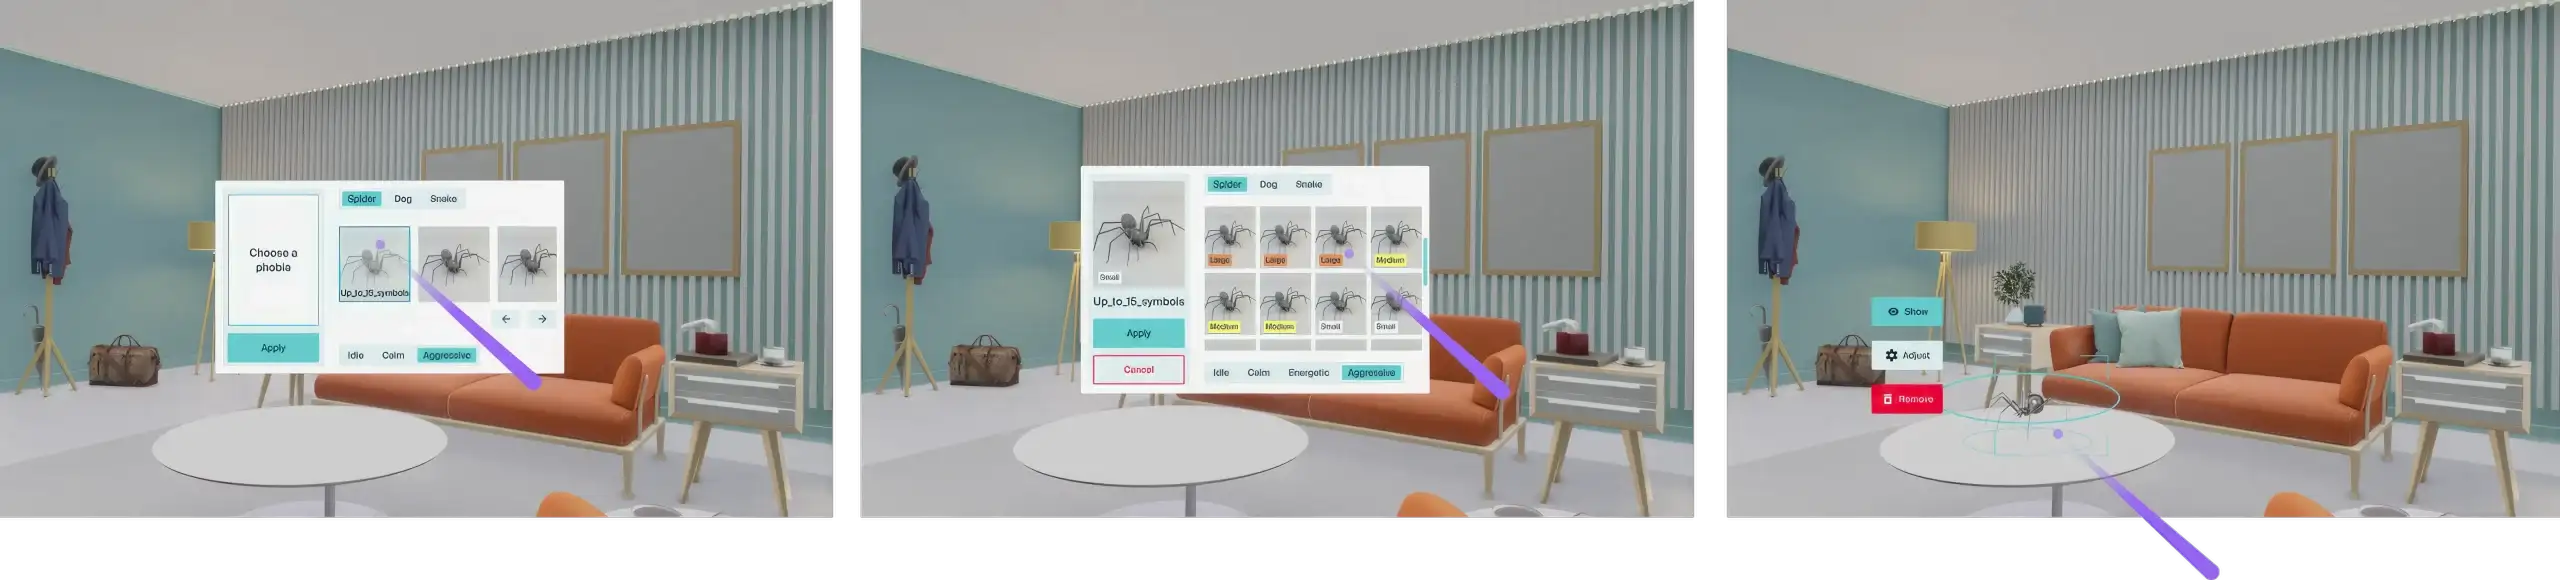 Doxy.me VR currently offers a tranquil clinic room for providers and patients